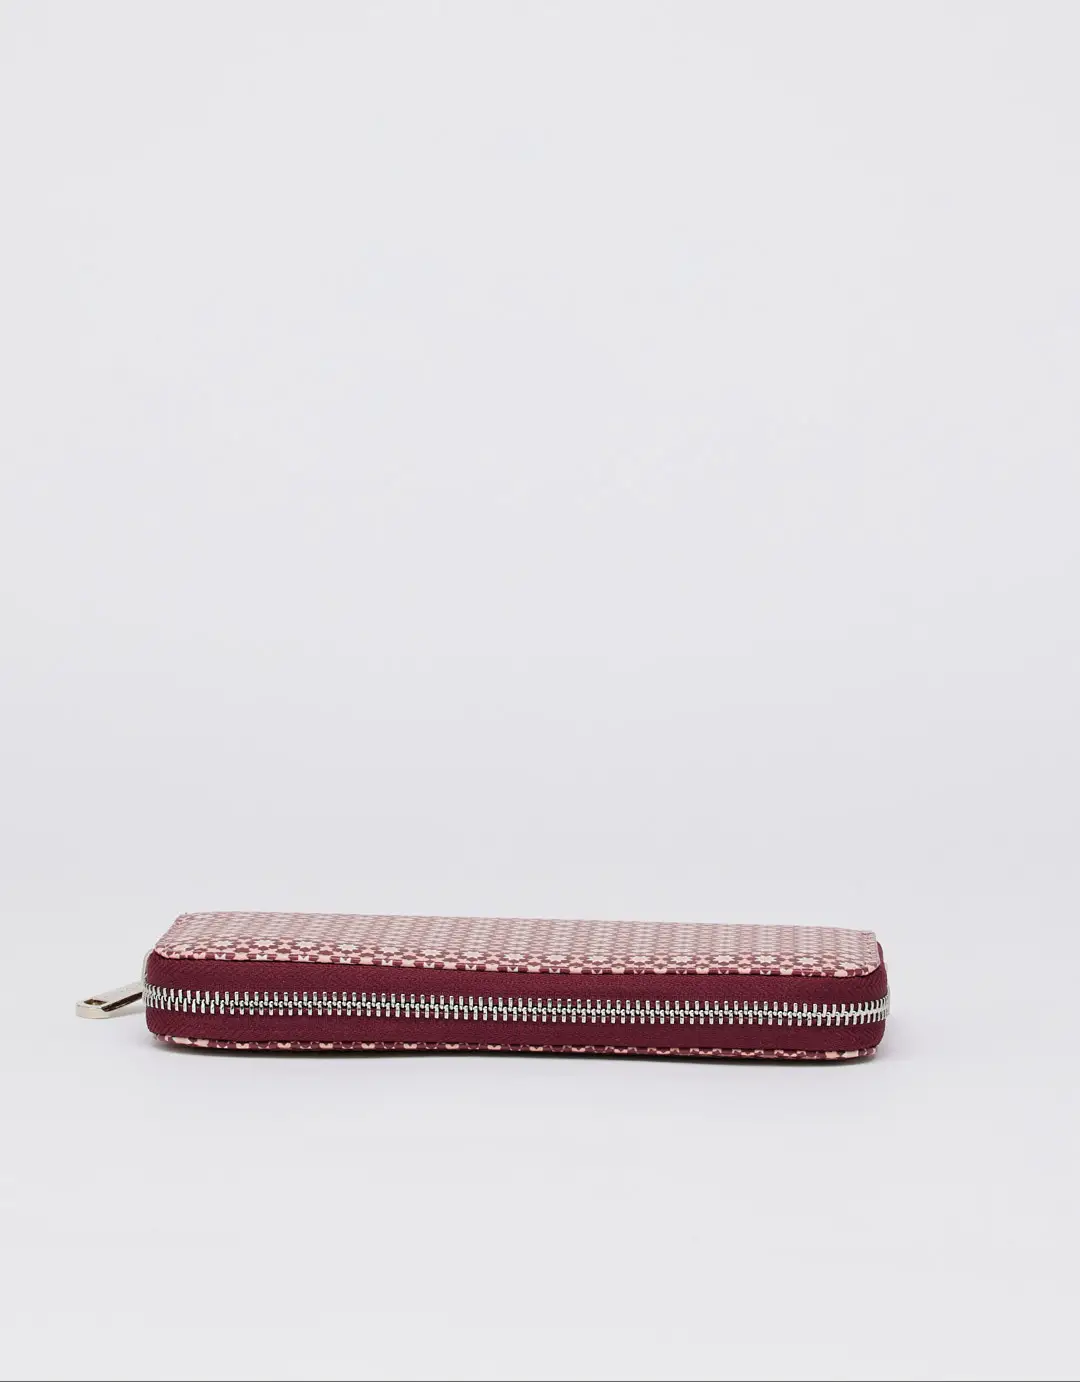 This beautiful wallet is made with high quality materials so the iconic touch of the mosaic completes the slender shape, this wallet is distinguished by a full zip closure and a well-organized interior. Ingenious, it can be used as a pocket.